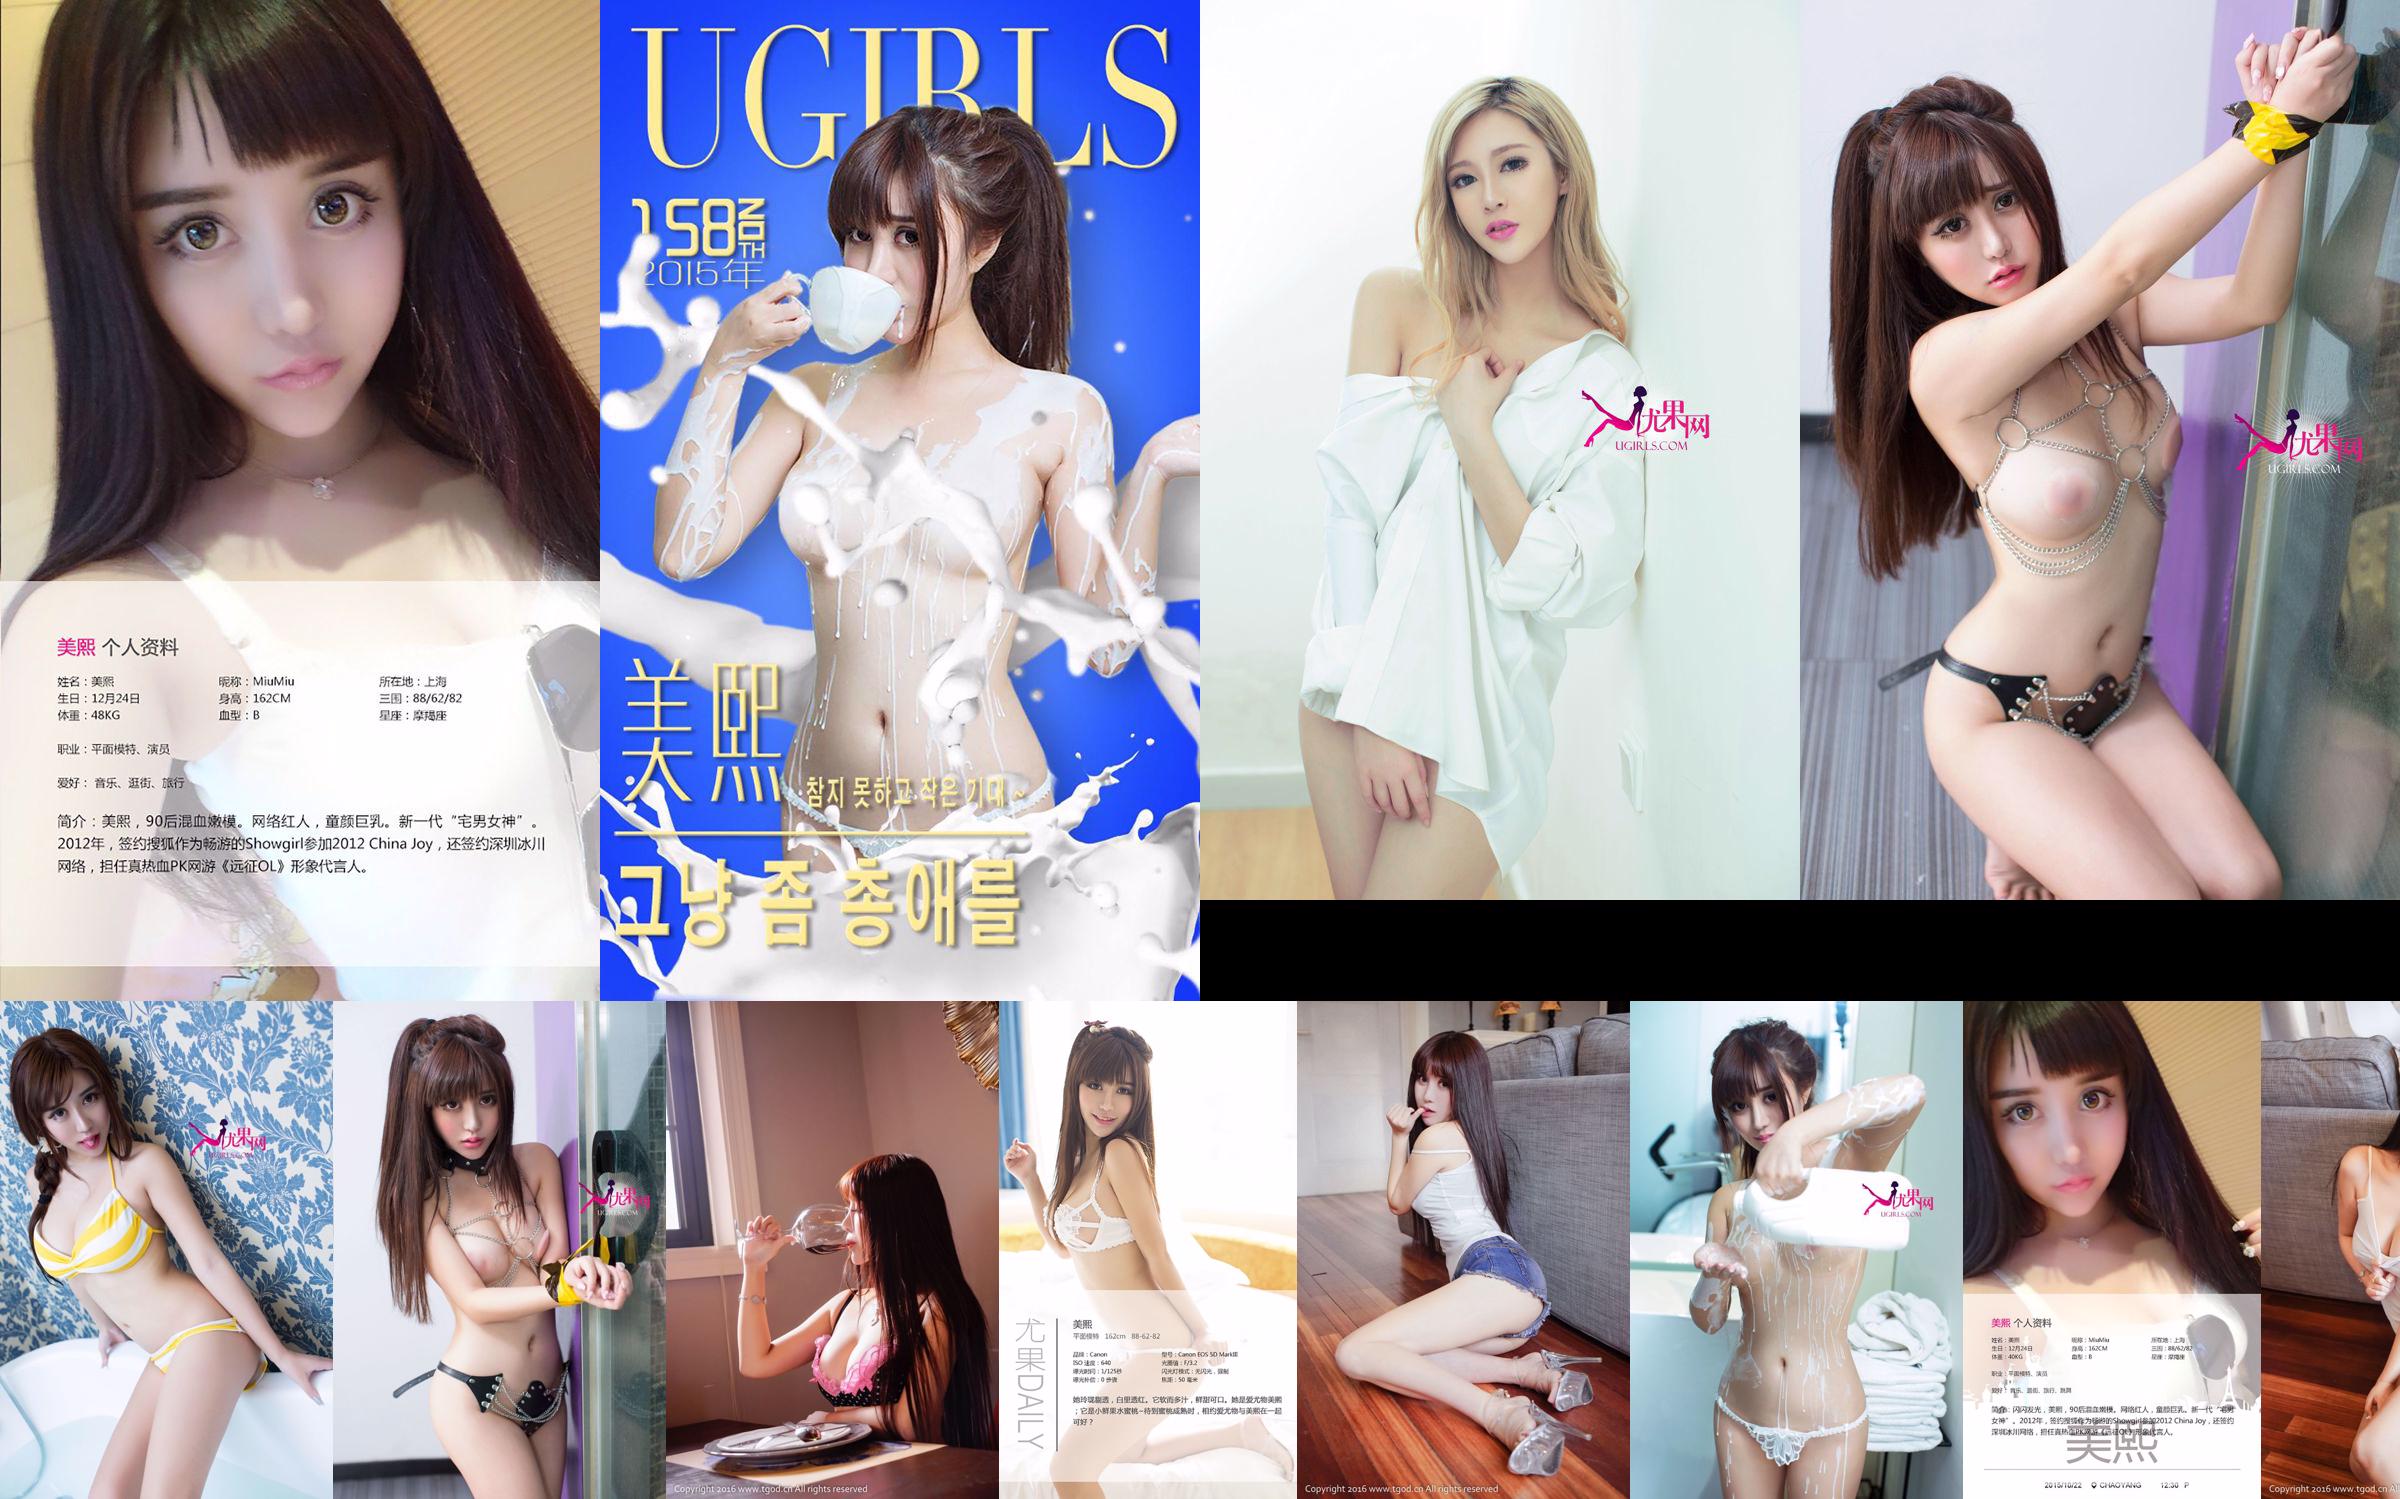 Miu Miu "The Little Expectation That Can't Be Held" [Love Youwu Ugirls] No.158 No.794428 Pagina 19